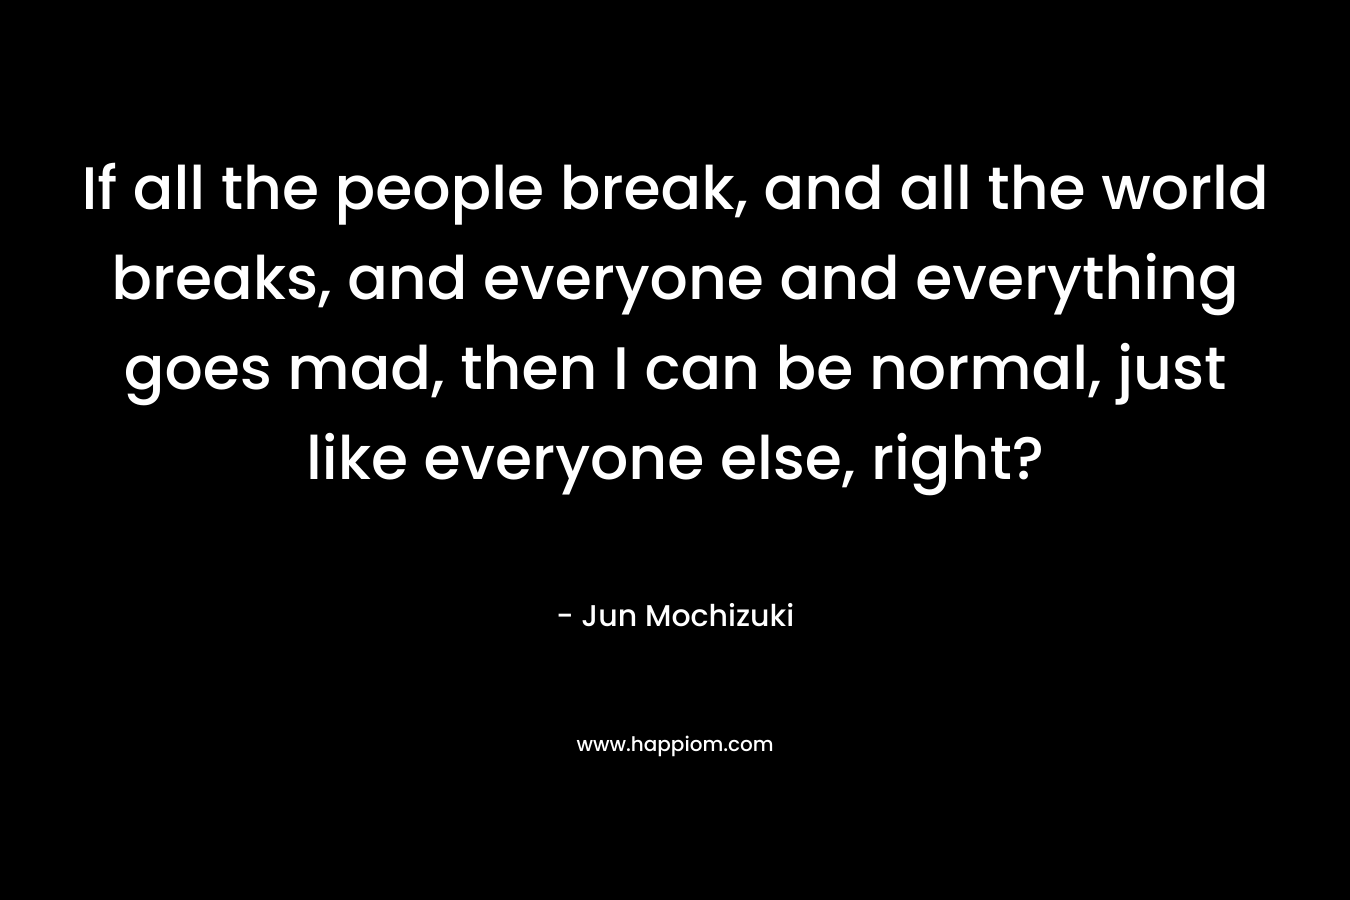 If all the people break, and all the world breaks, and everyone and everything goes mad, then I can be normal, just like everyone else, right? – Jun Mochizuki